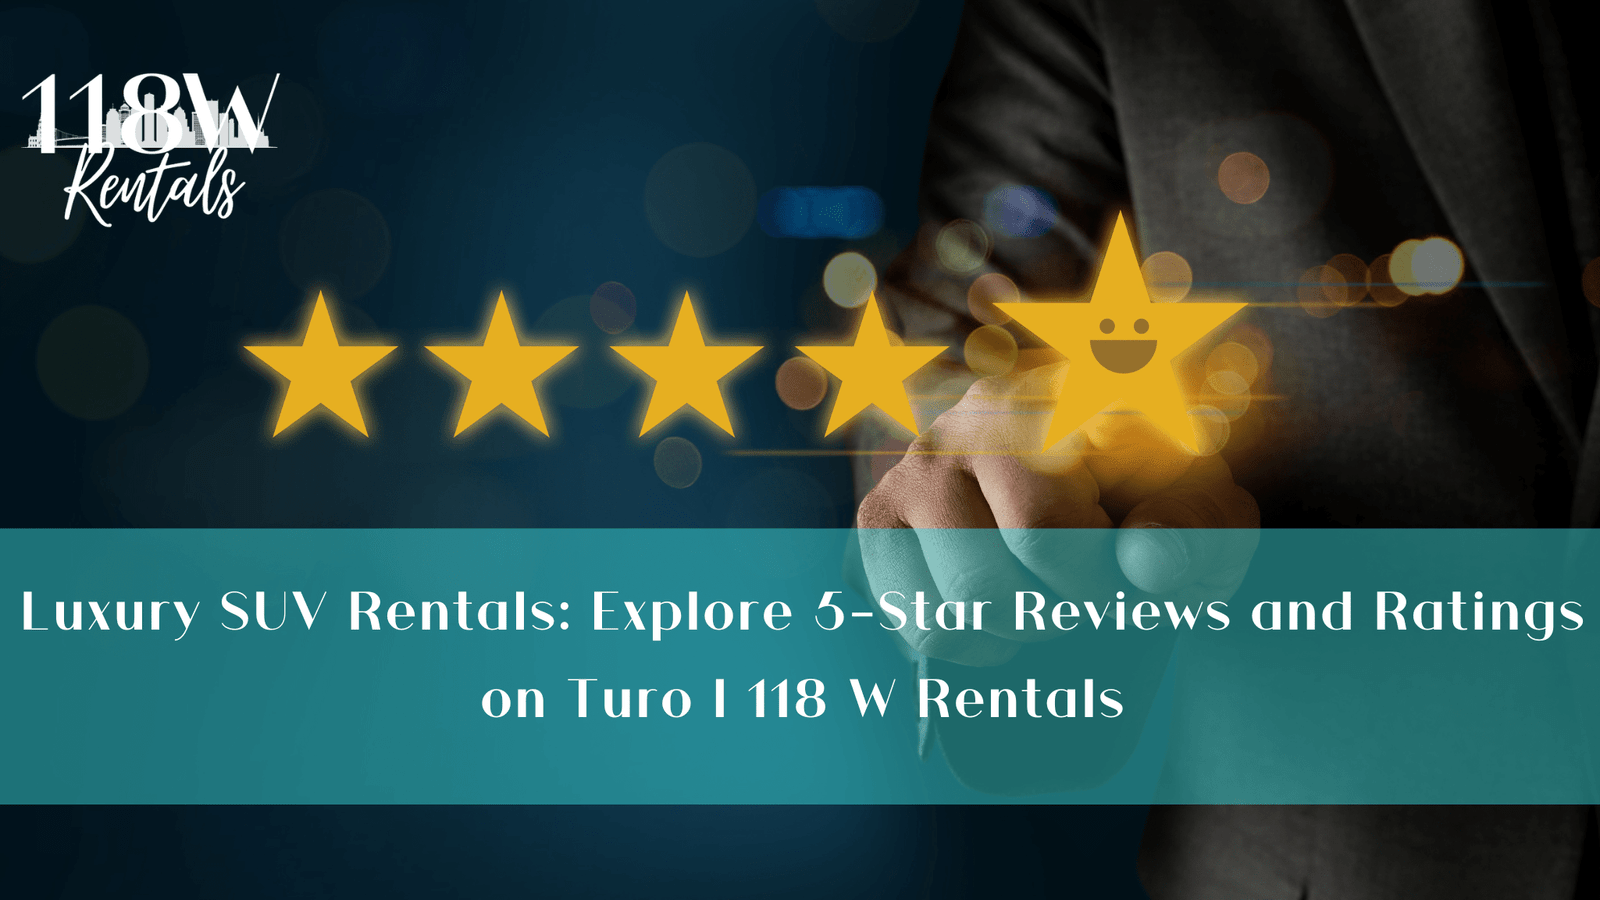 Luxury SUV Rentals: Explore 5-Star Reviews and Ratings on Turo | 118 W Rentals